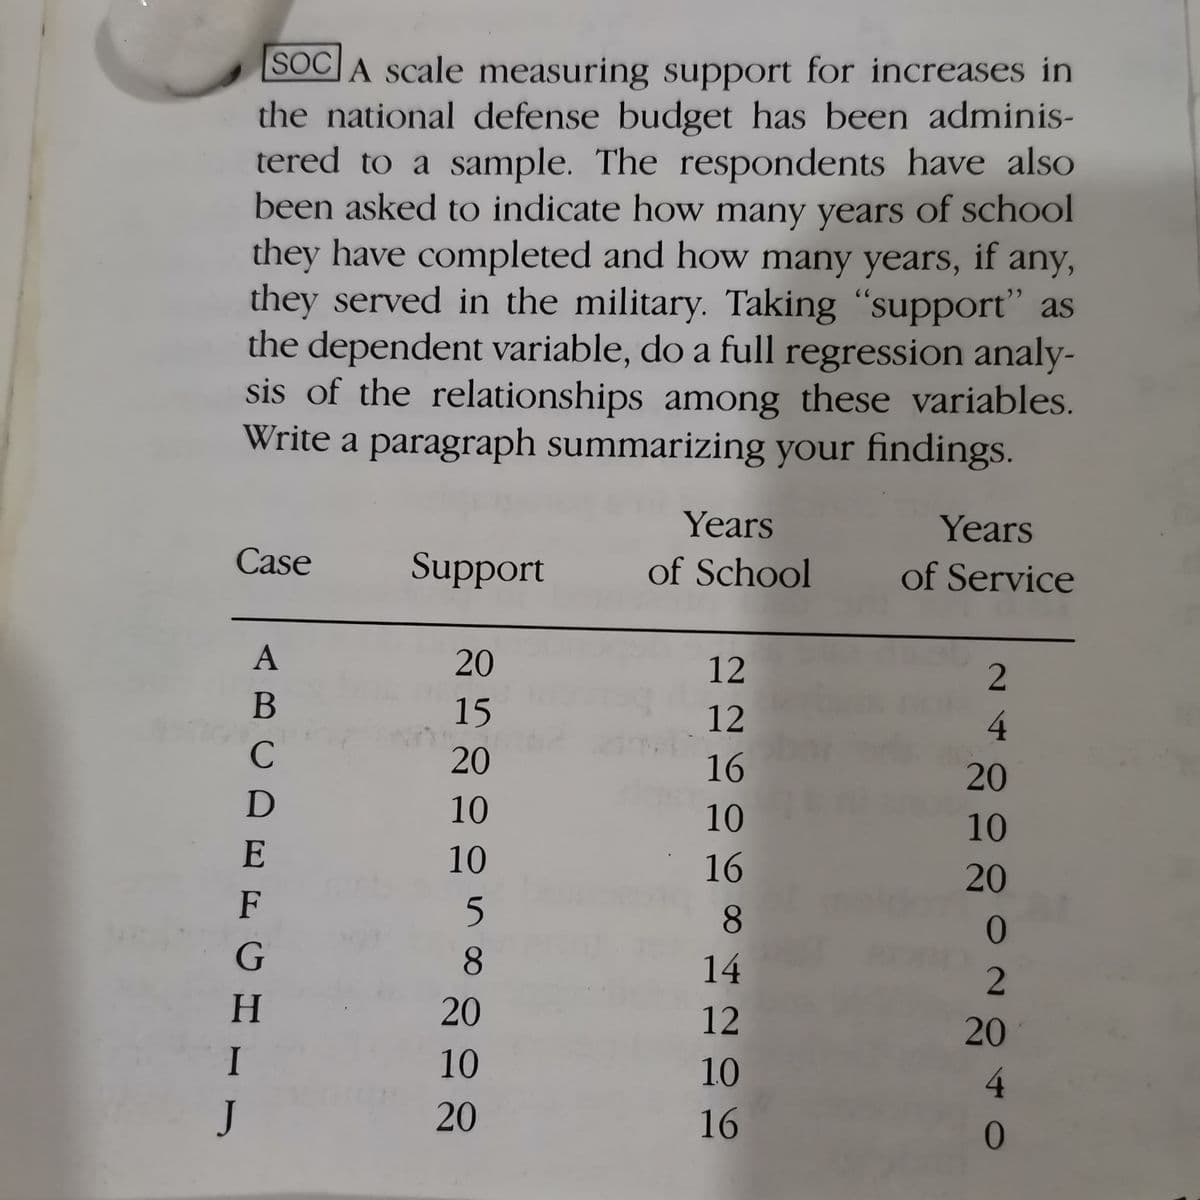 SOC]A scale measuring support for increases in
the national defense budget has been adminis-
tered to a sample. The respondents have also
been asked to indicate how many years of school
they have completed and how many years, if any,
they served in the military. Taking "support" as
the dependent variable, do a full regression analy-
sis of the relationships among these variables.
Write a paragraph summarizing your findings.
Years
Years
Case
Support
of School
of Service
20
12
B
15
12
4.
C
20
16
20
D
10
10
10
10
16
20
8.
G
8.
14
H.
20
12
20
I
10
10
4
J
20
16
E F
